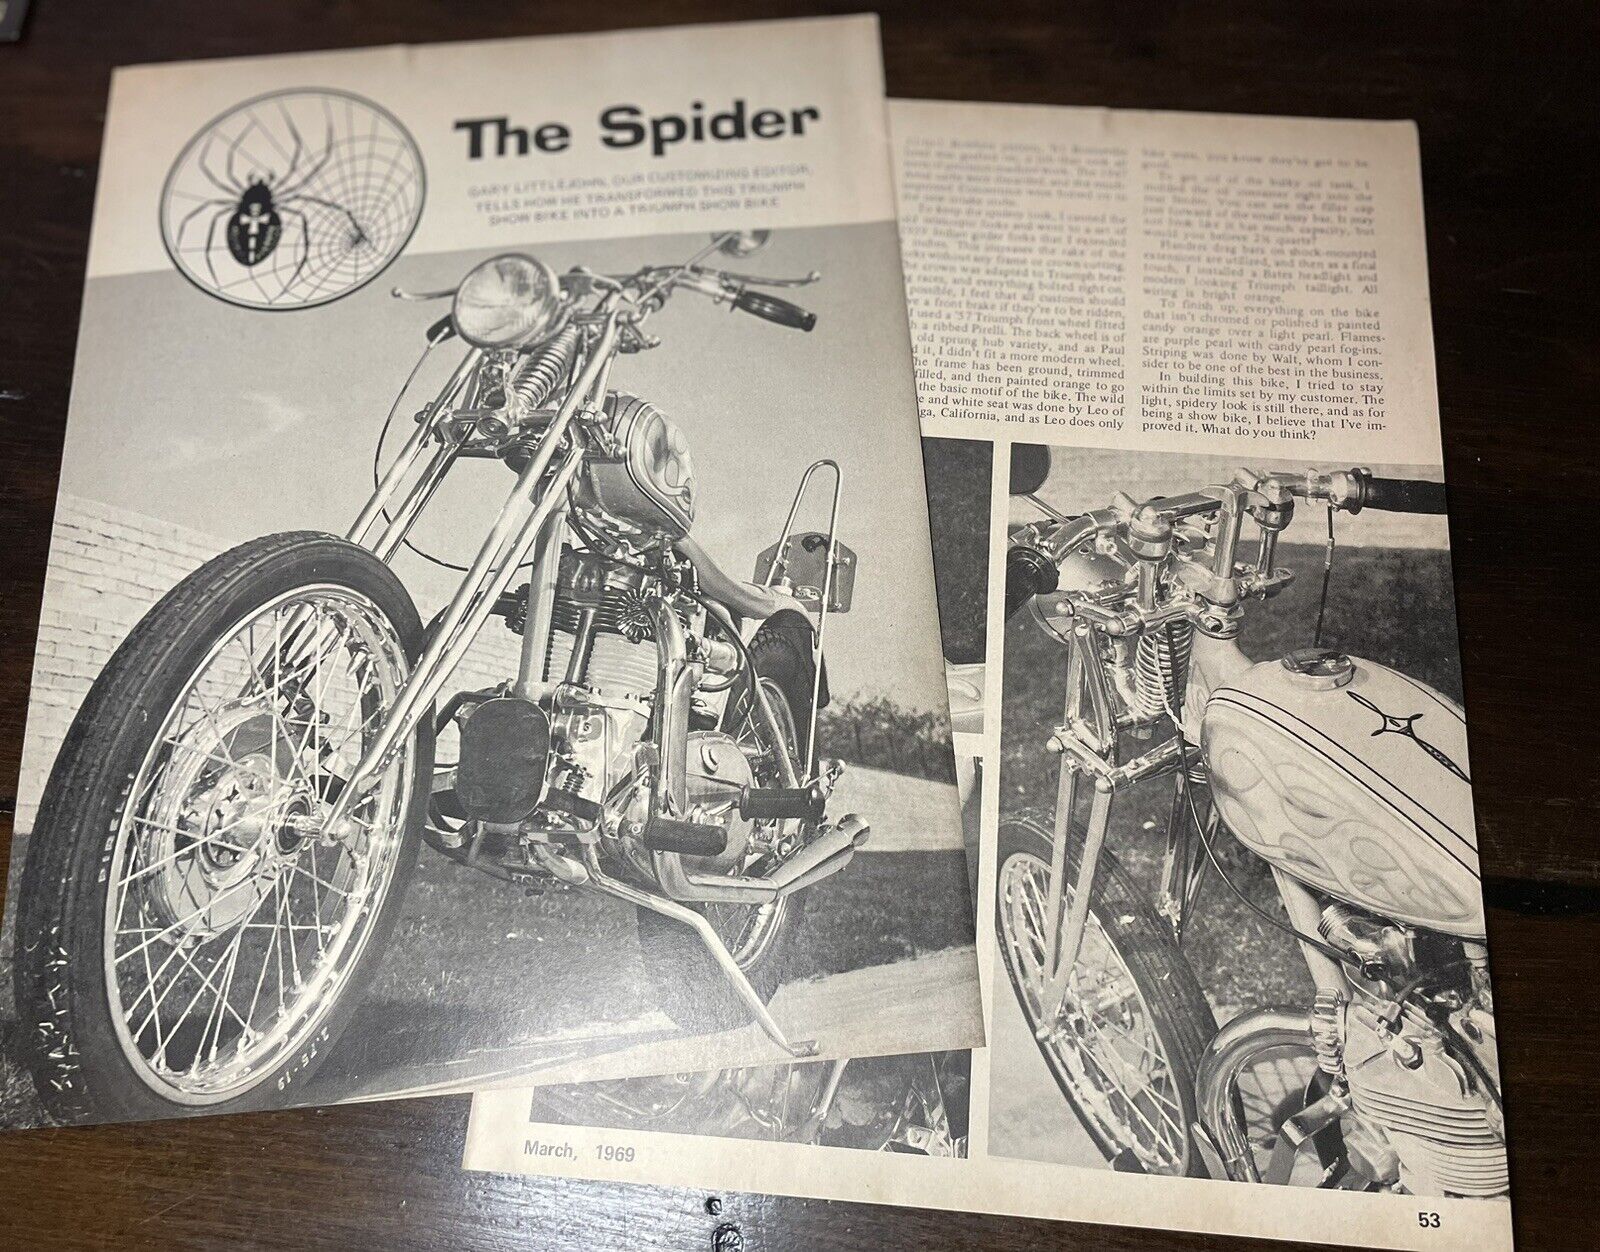 1969 Triumph Custom Vintage Motorcycle Article. The Spider